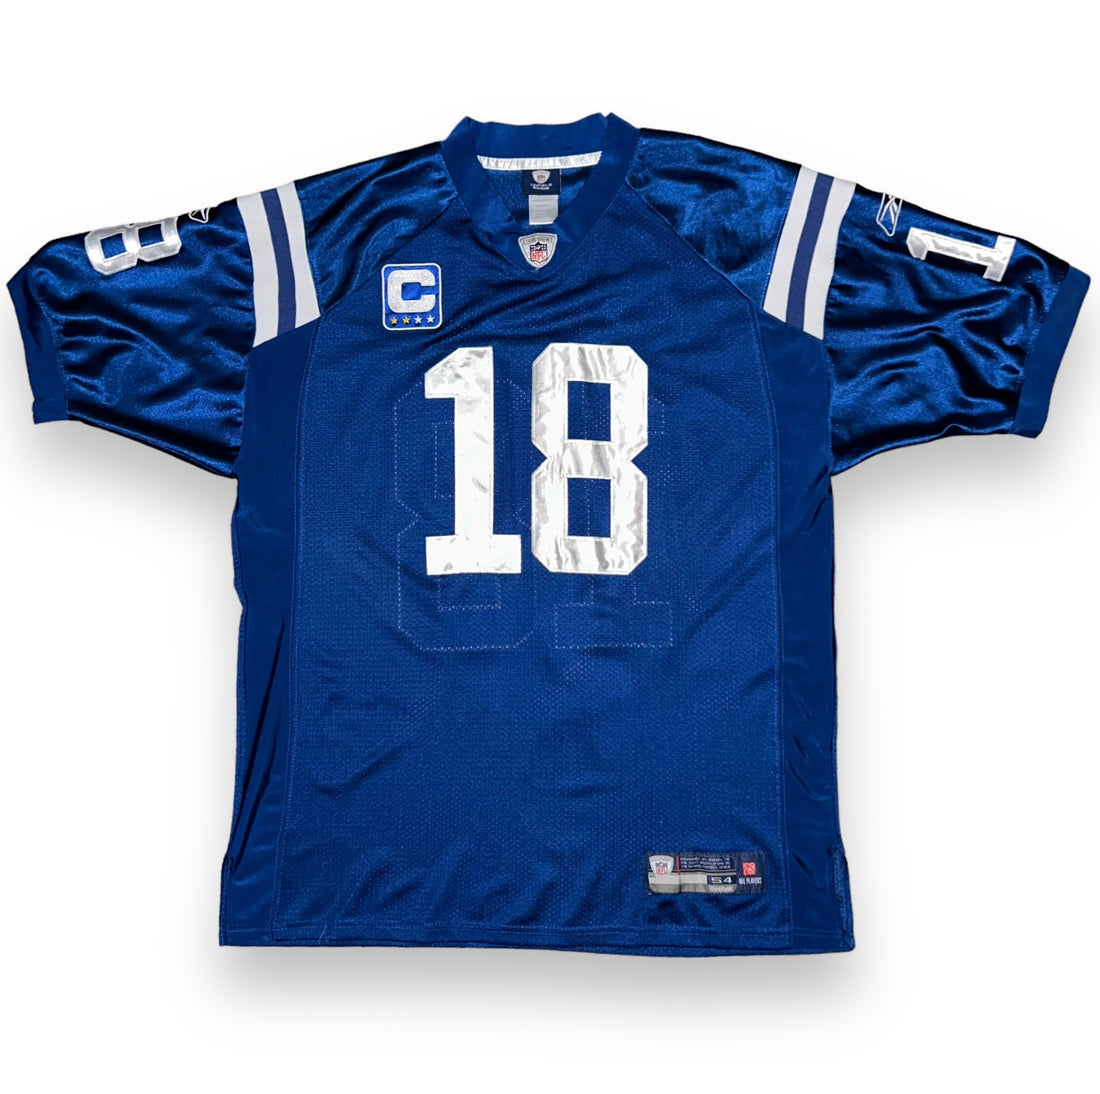 Jersey Indianopolis Colts NFL Vintage  (XL)